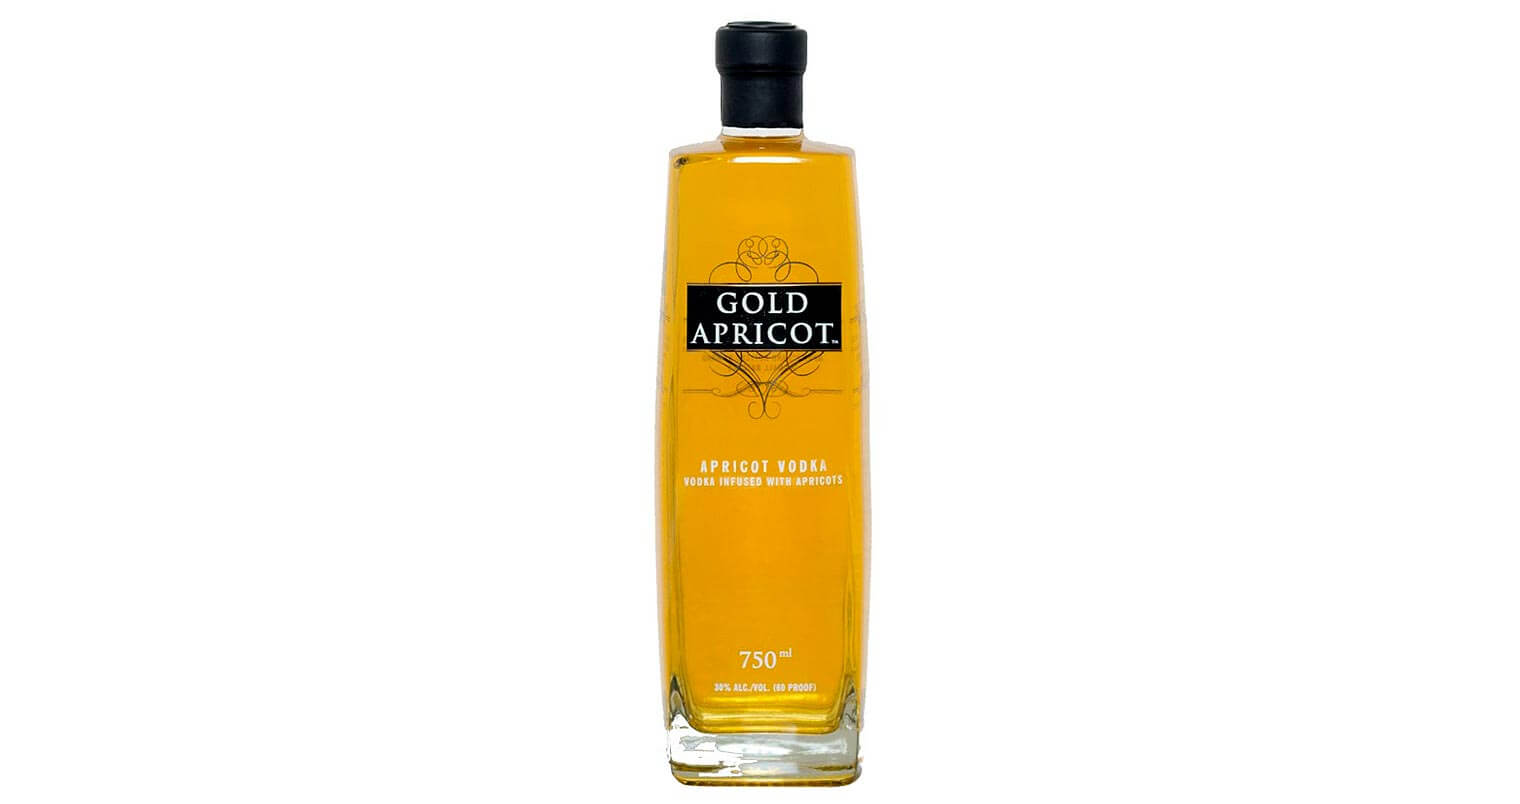 Gold Apricot Vodka, bottle on white, feature imaged